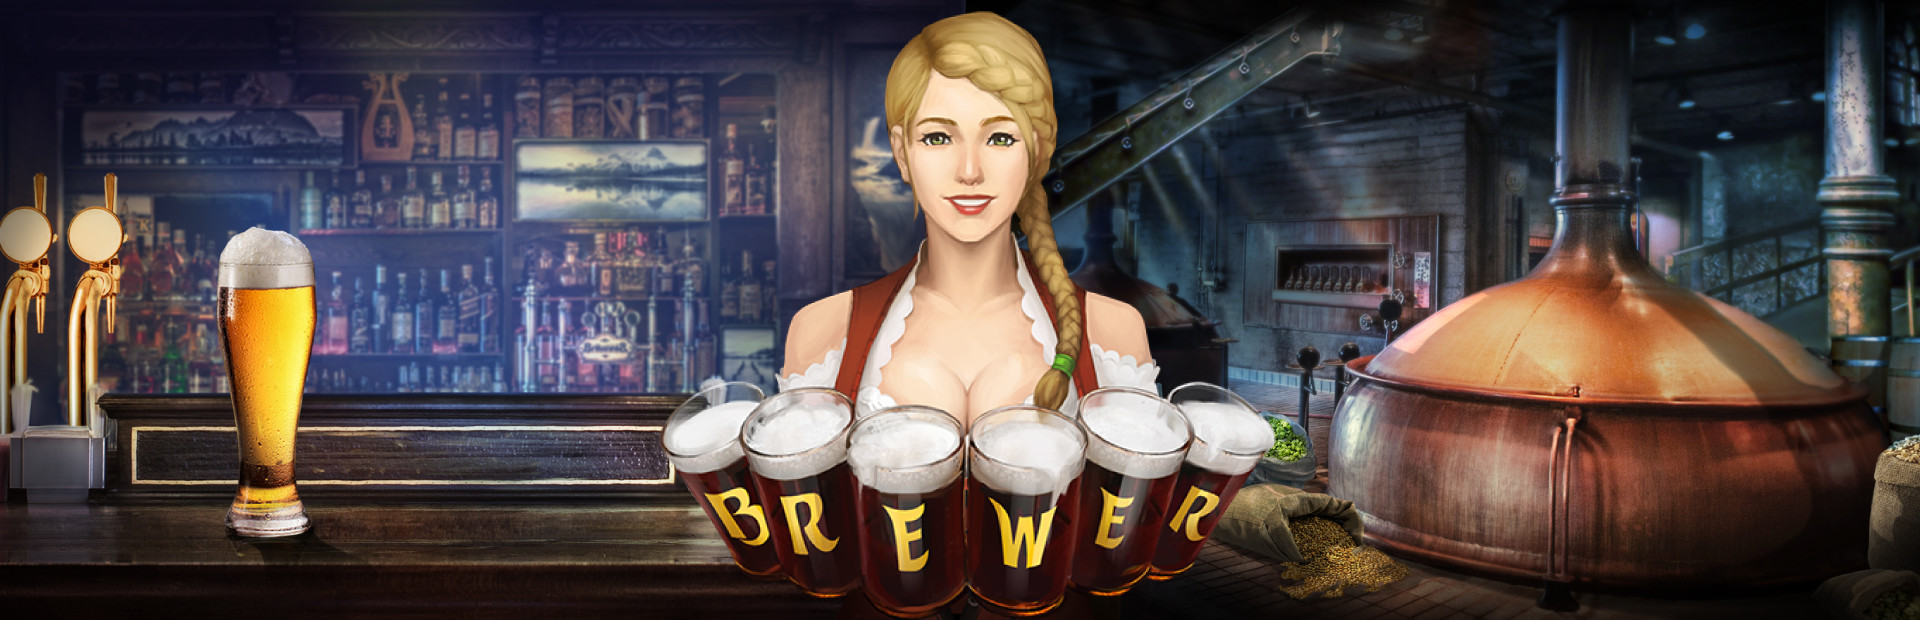 Brewer cover image